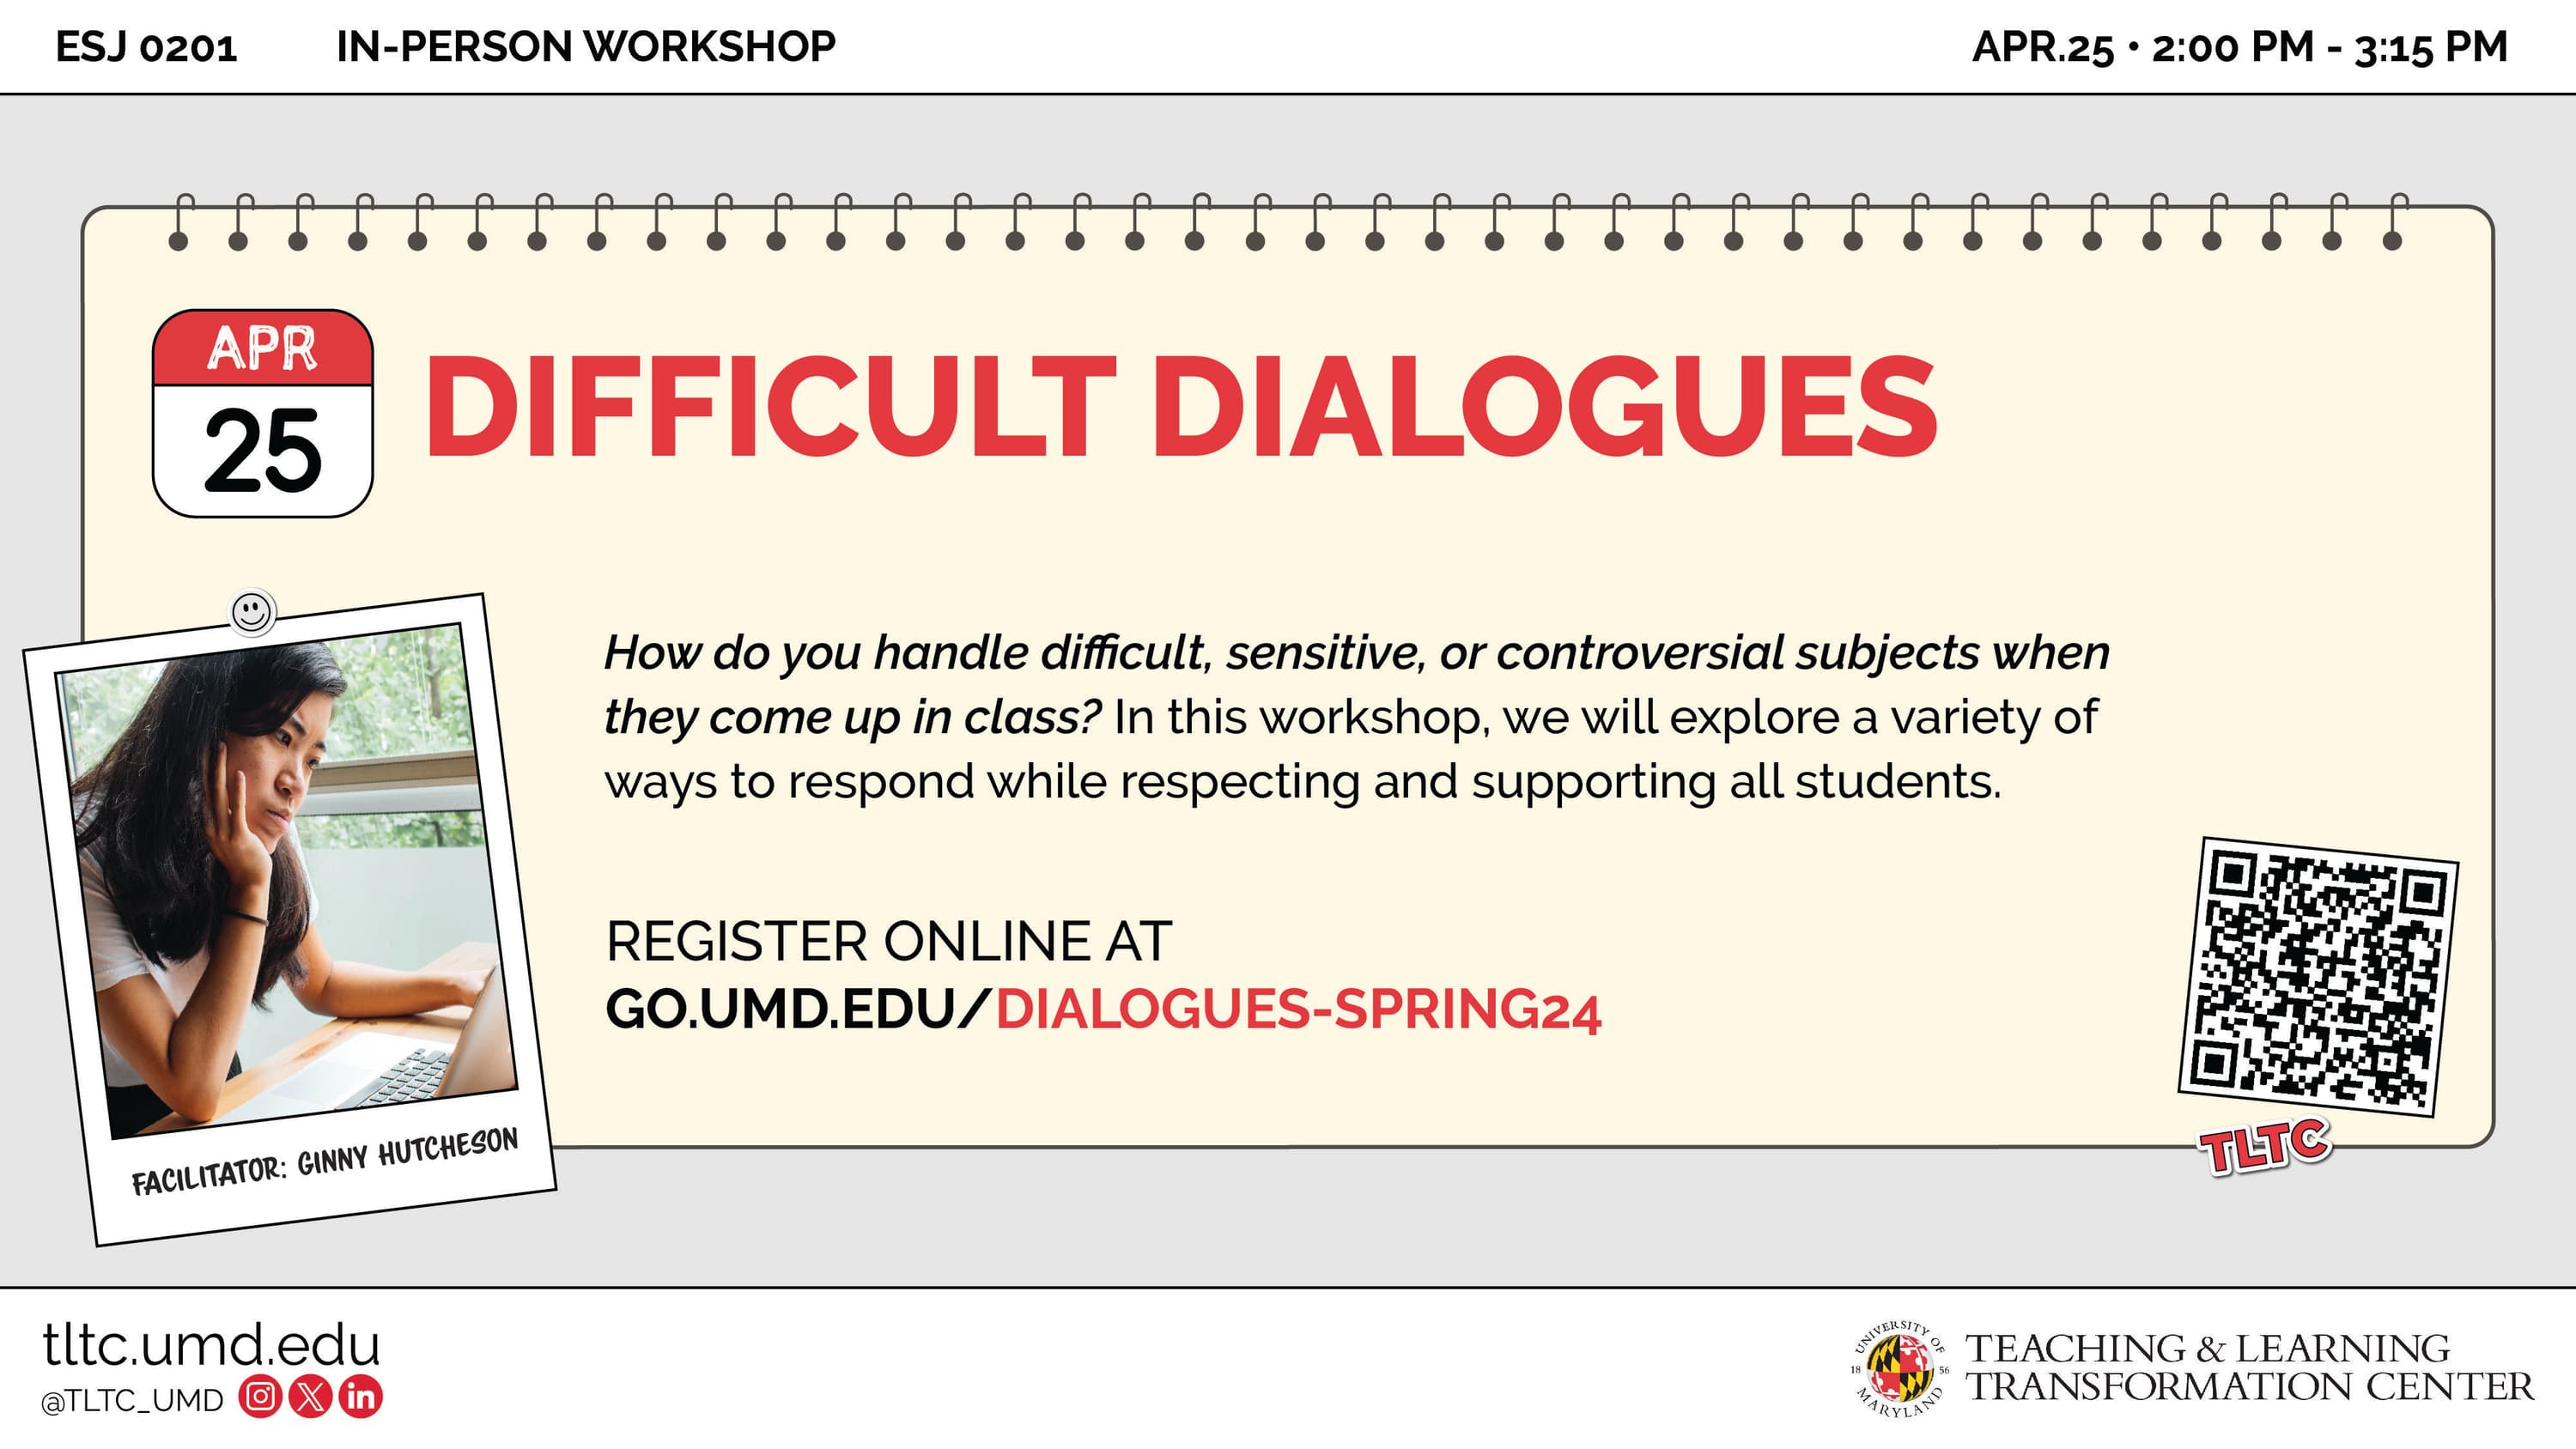 Flyer for Difficult Dialogues